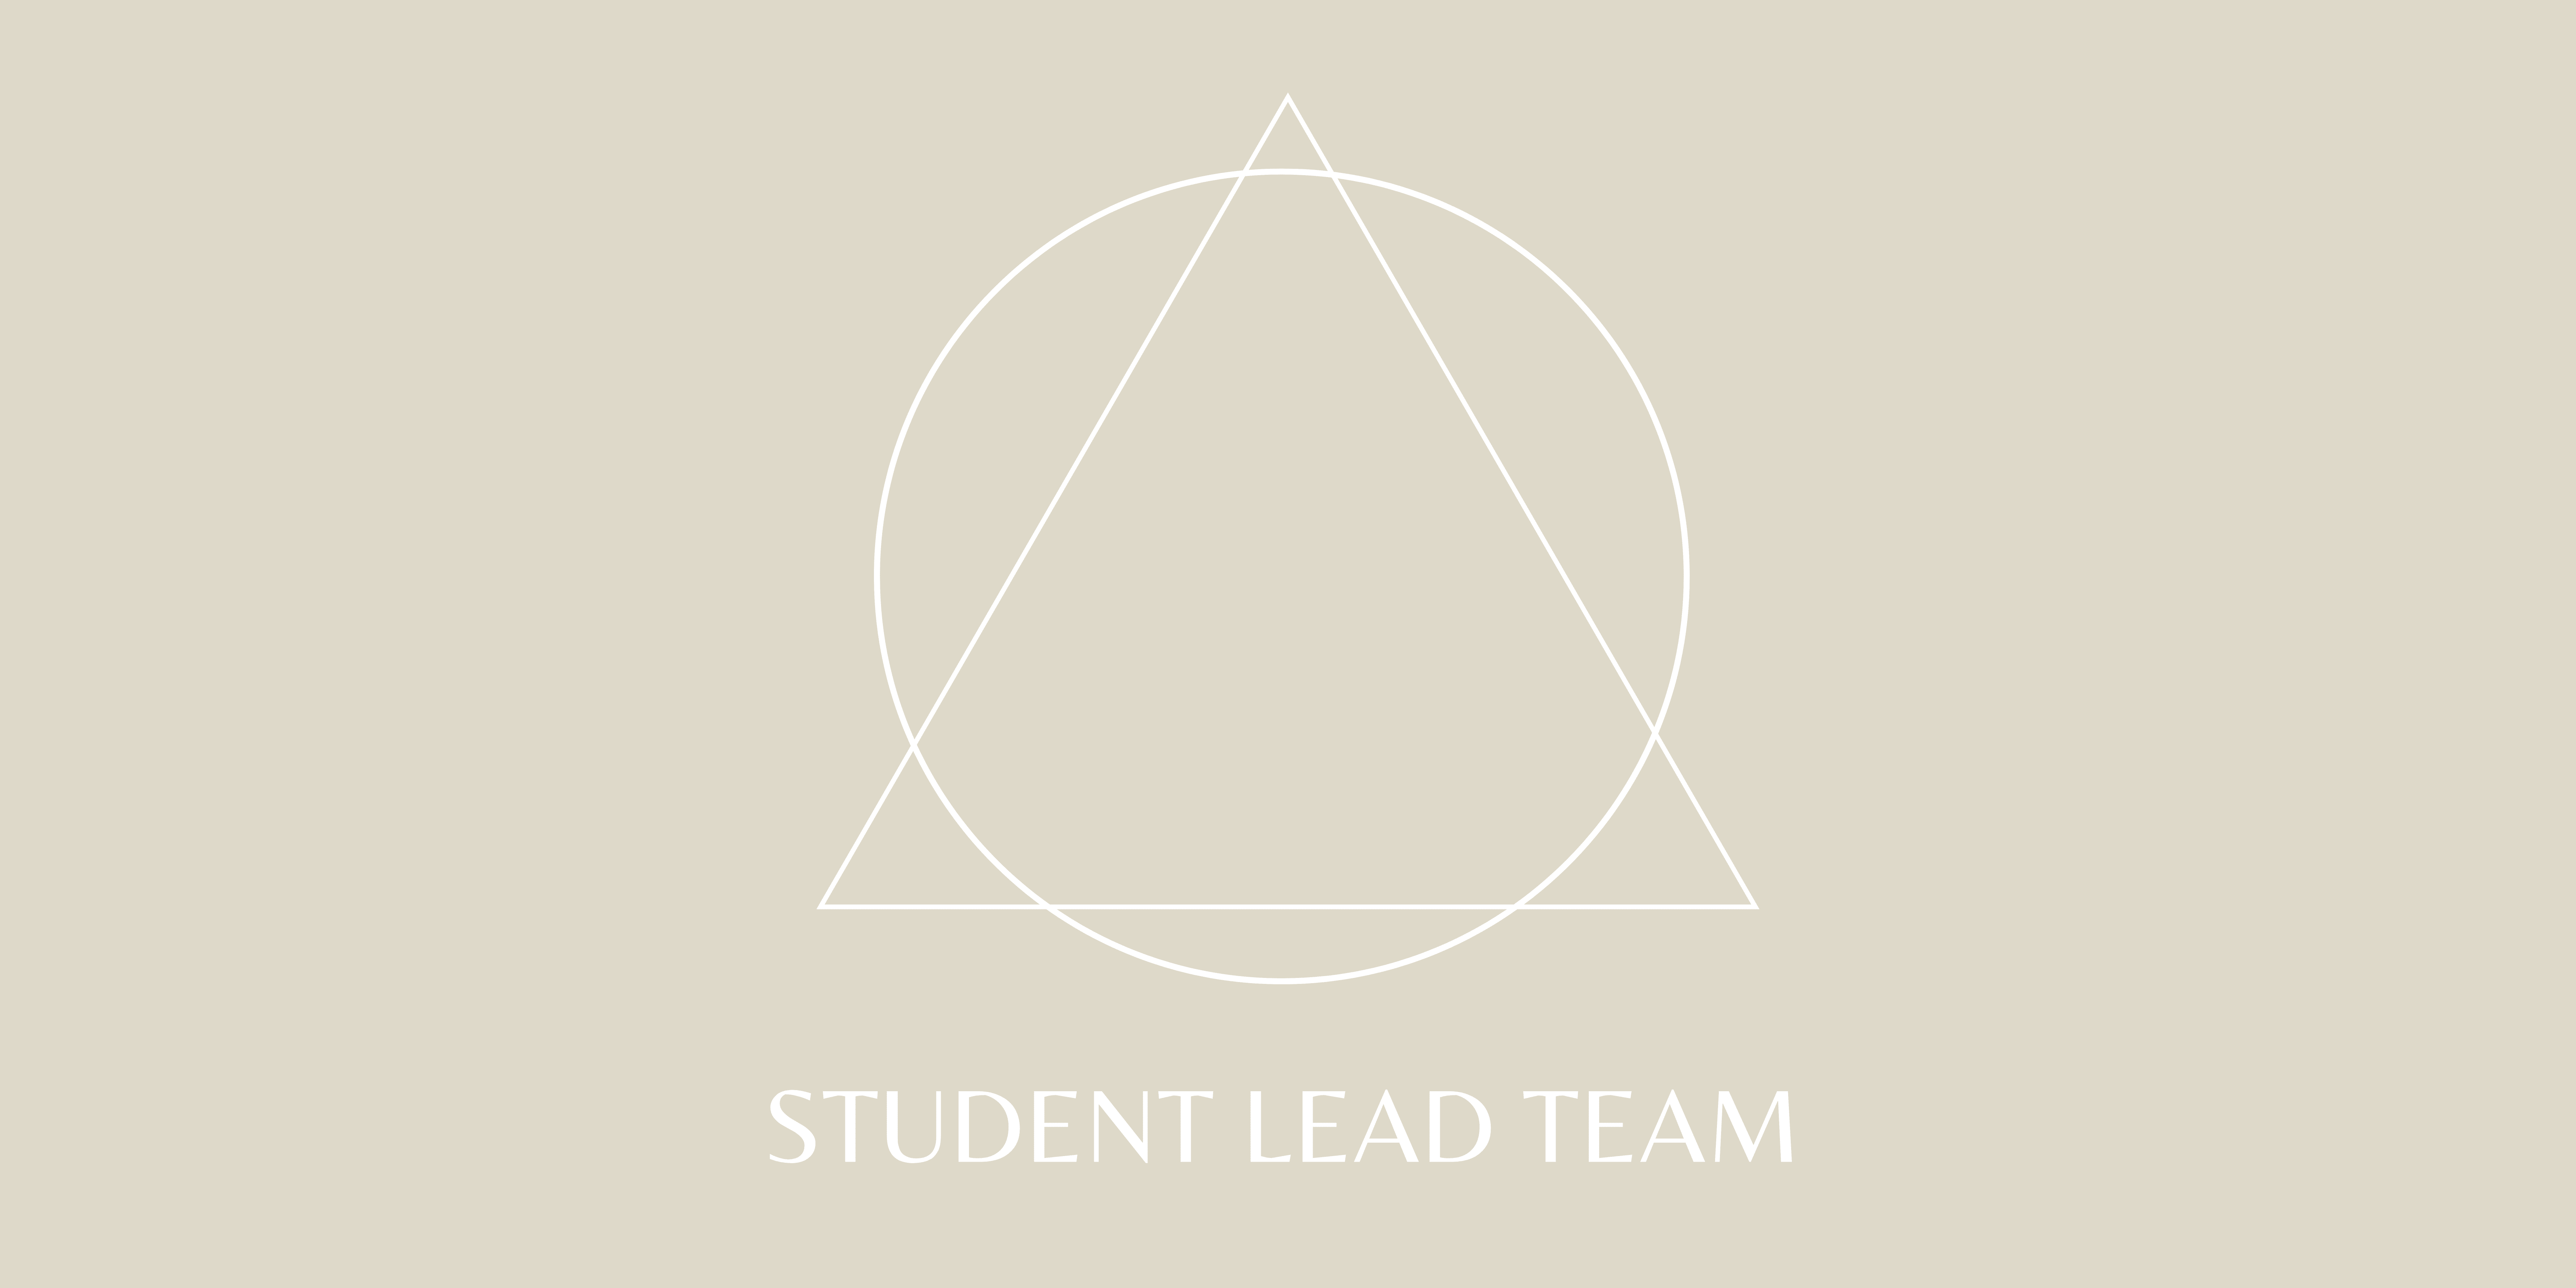 Asbury’s Student Lead Team Program is an opportunity to make this Student Ministry your own.